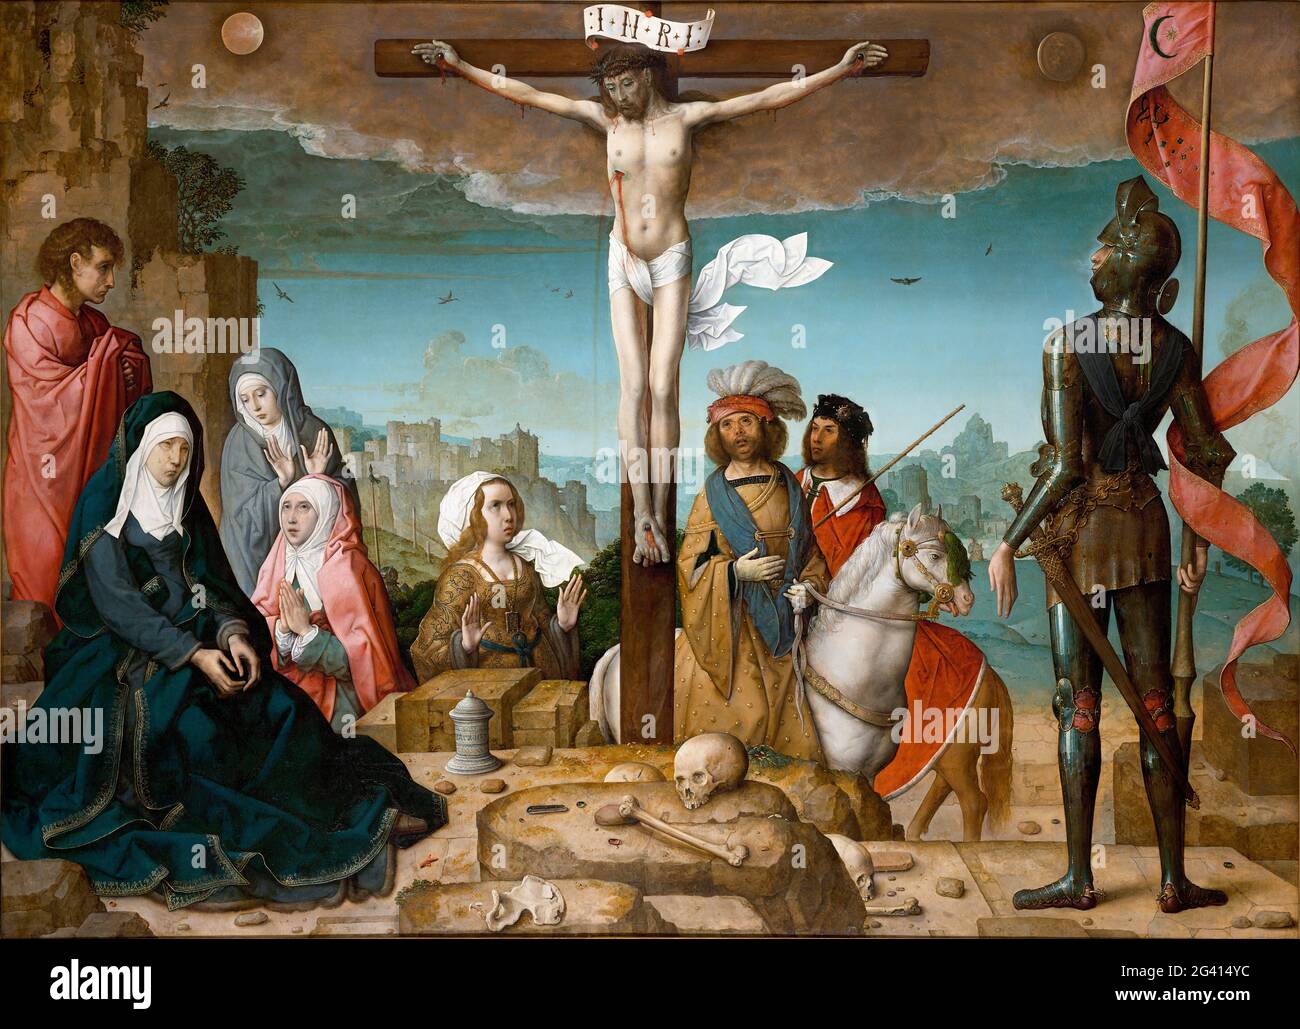 The Crucifixion by Juan de Flandes (John of Flanders: c. 1460- c. 1519), oil on panel, 1509-19 Stock Photo